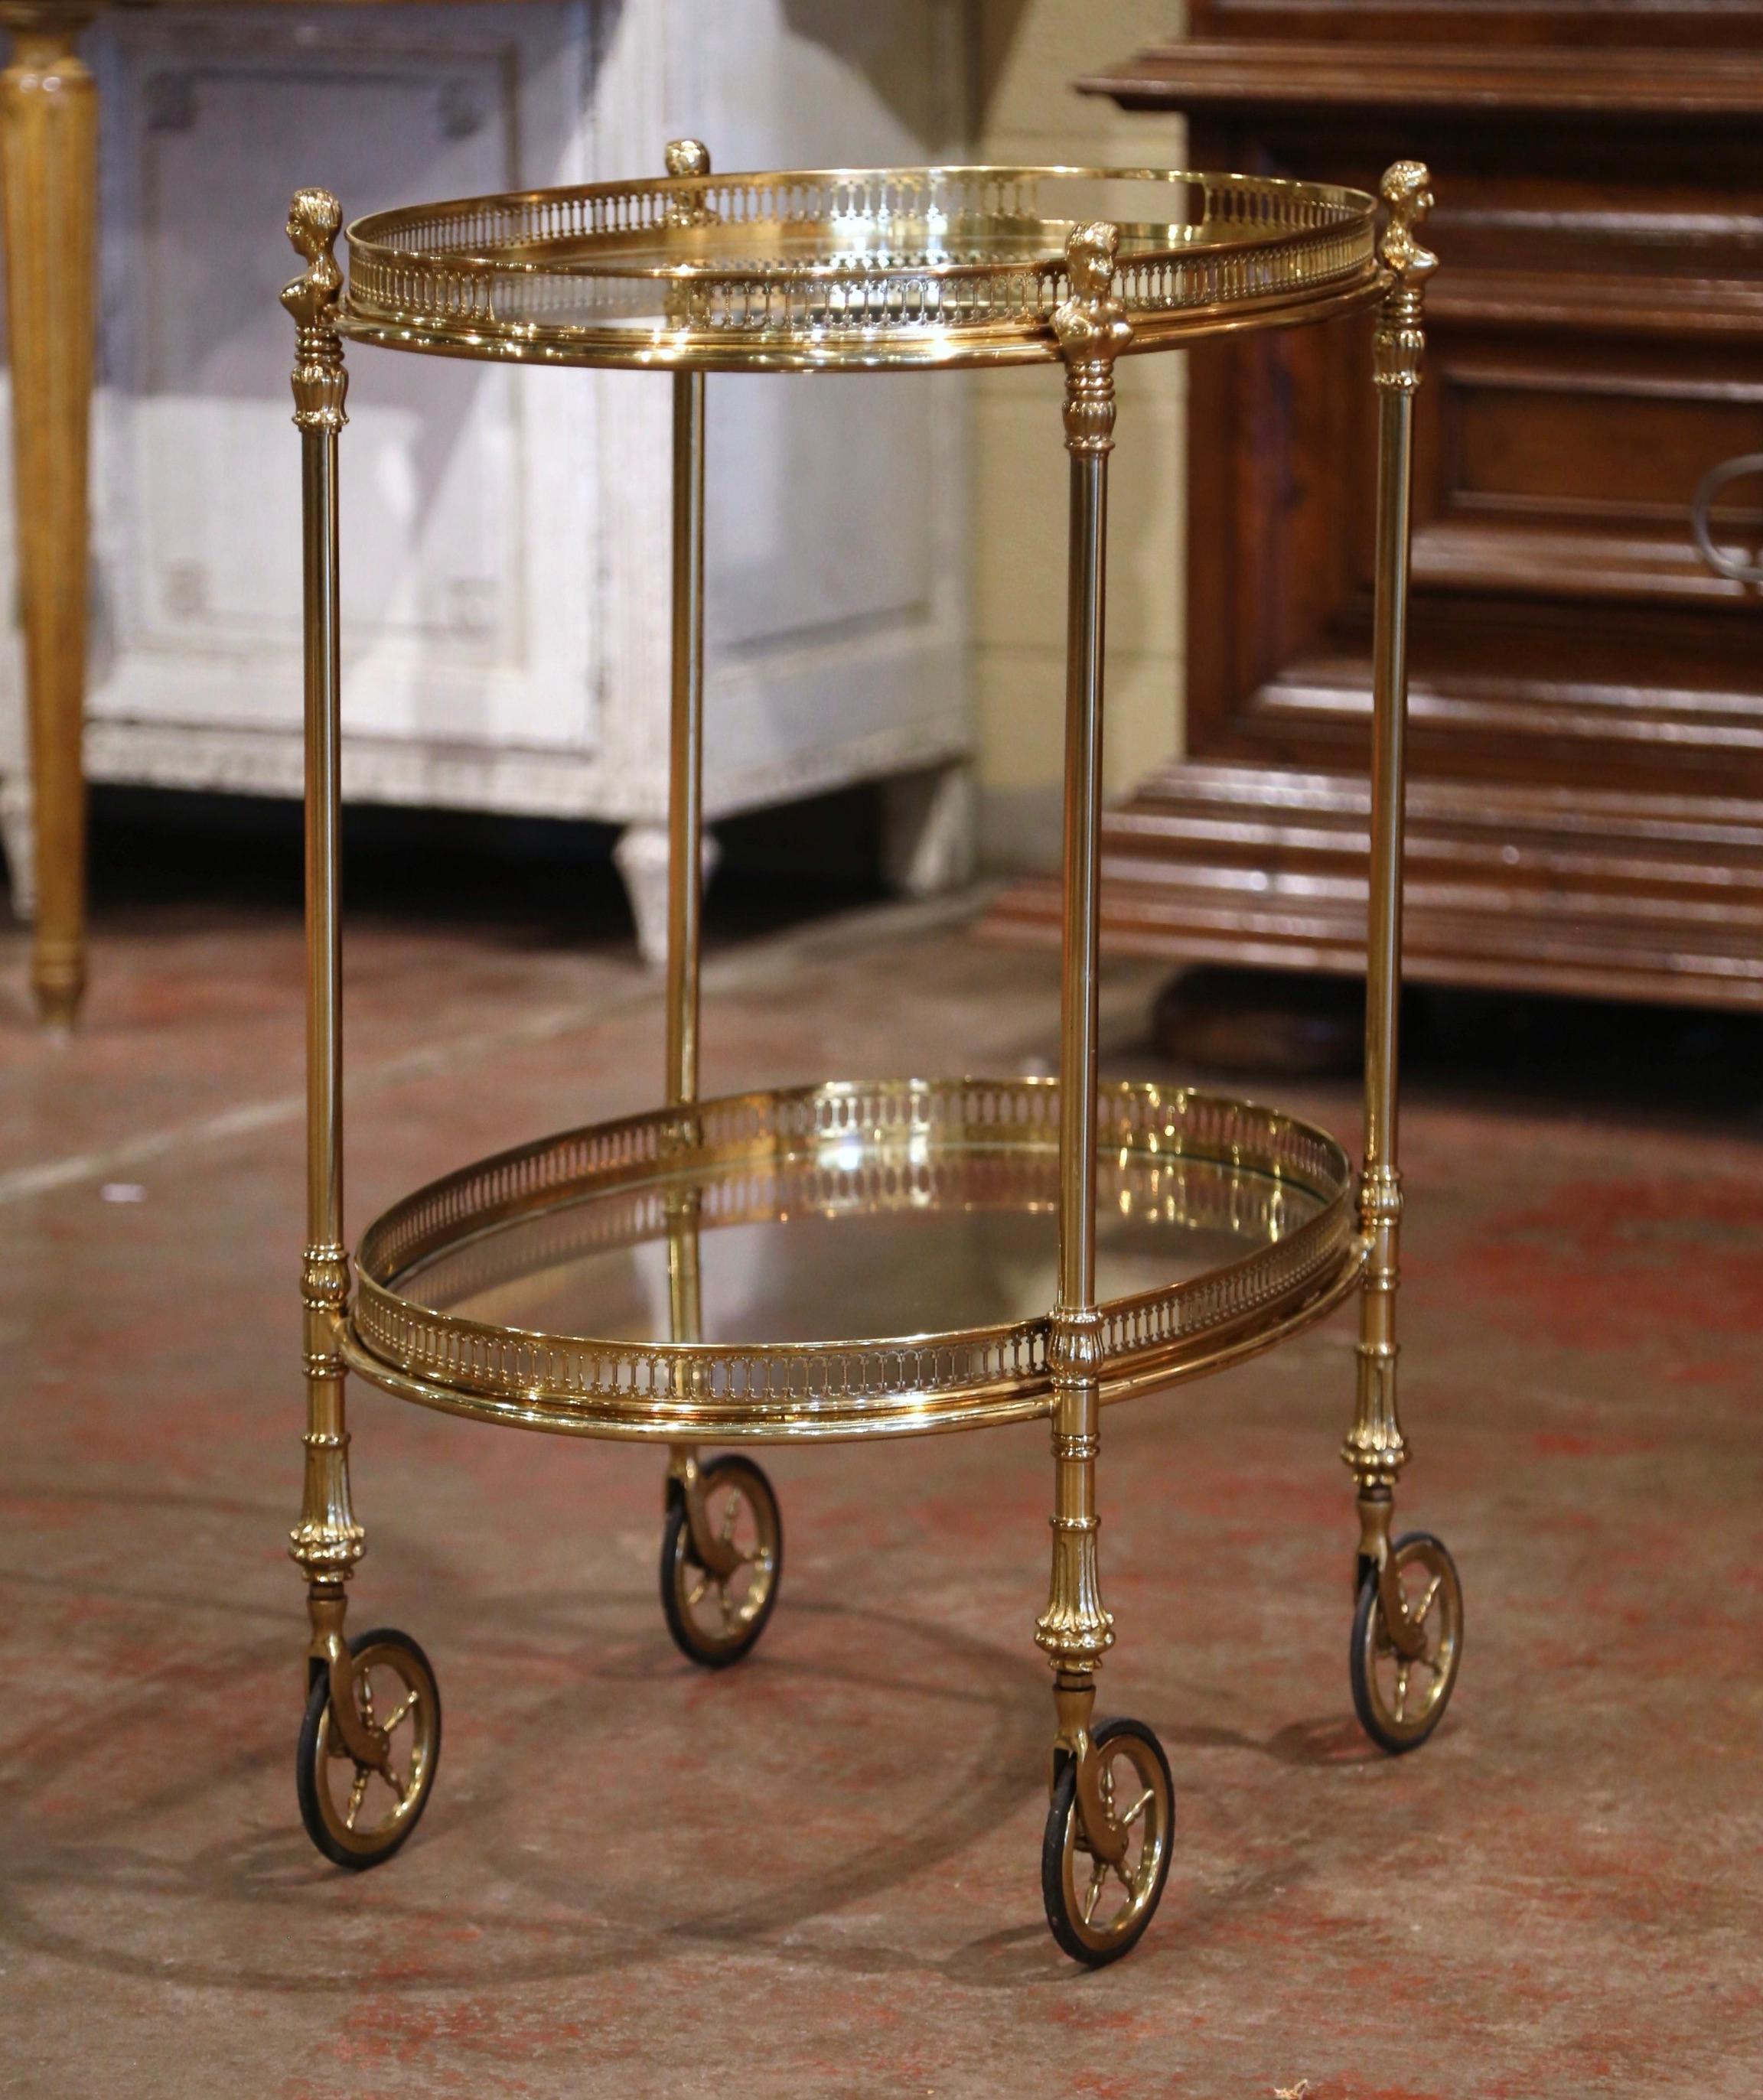 Midcentury French Polished Brass Dessert Table or Bar Cart on Rubber Wheels 3